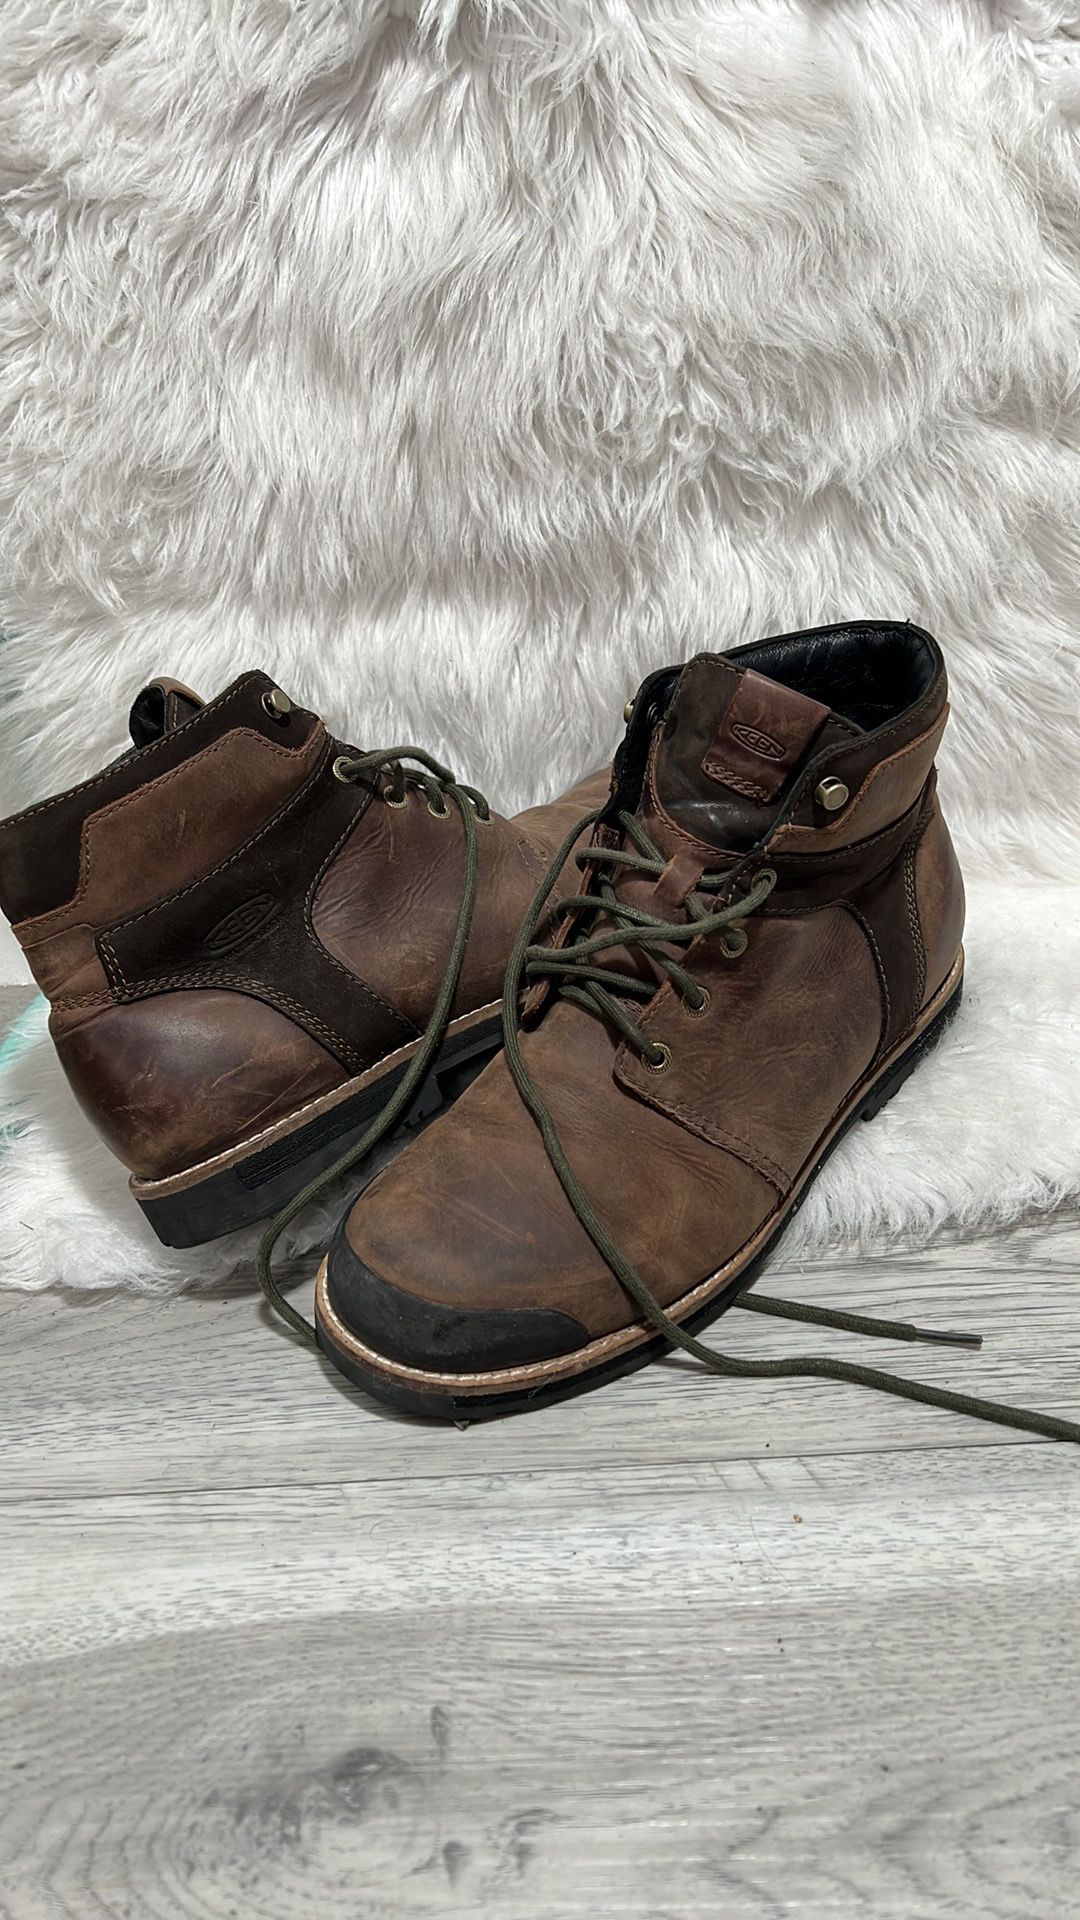 Keen Brown Leather Lace Up Hiking Boots size 11 